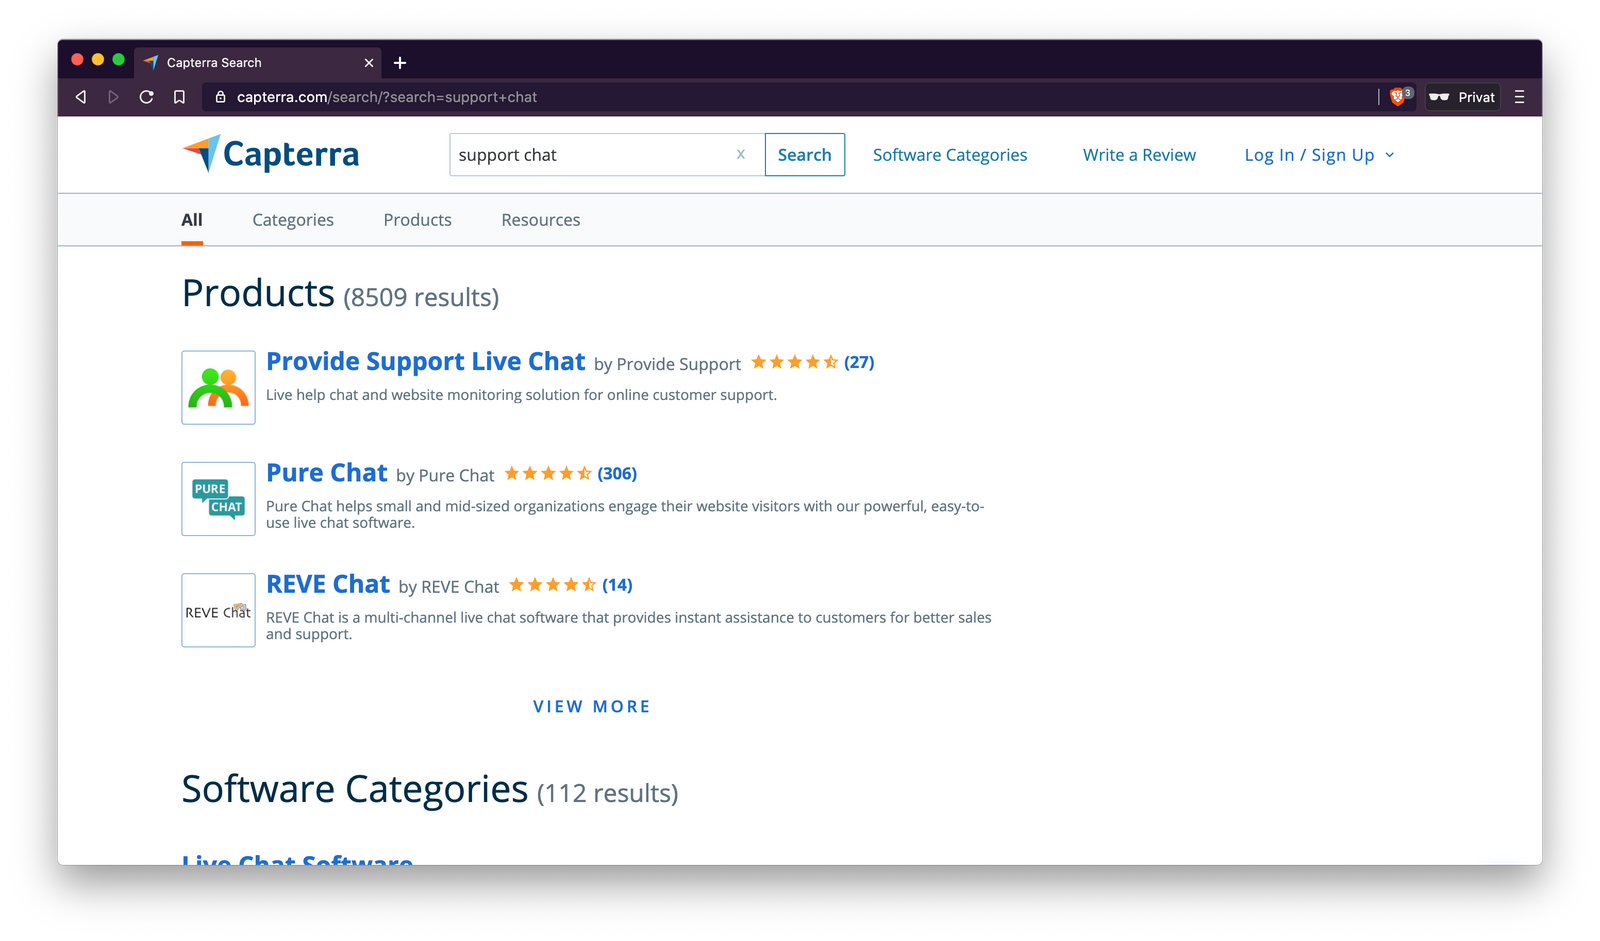 Searching for "Support Chat" on Capterra